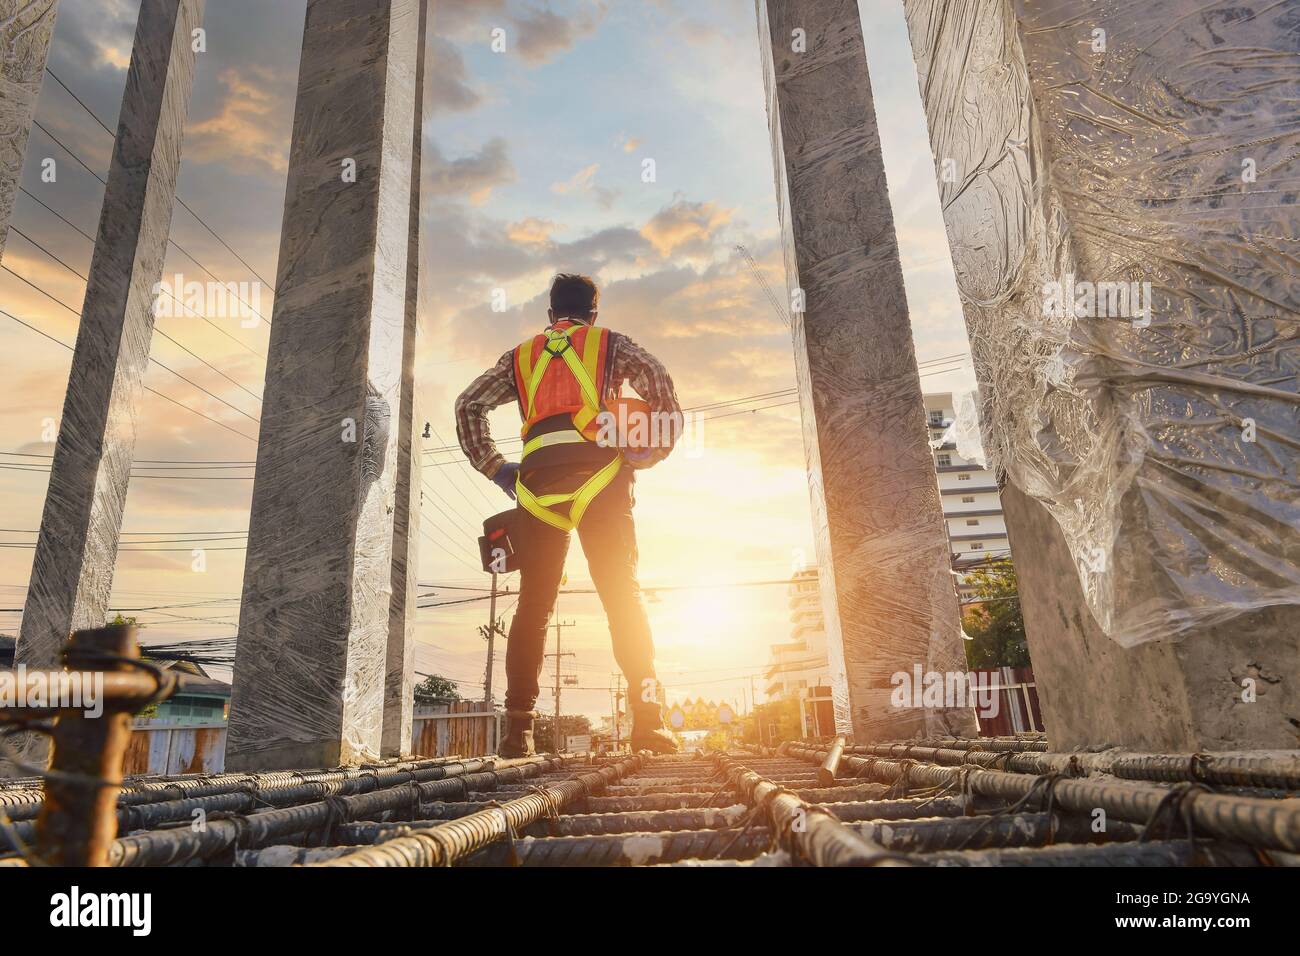 Rear view of a man on a building site, Thailand Stock Photo